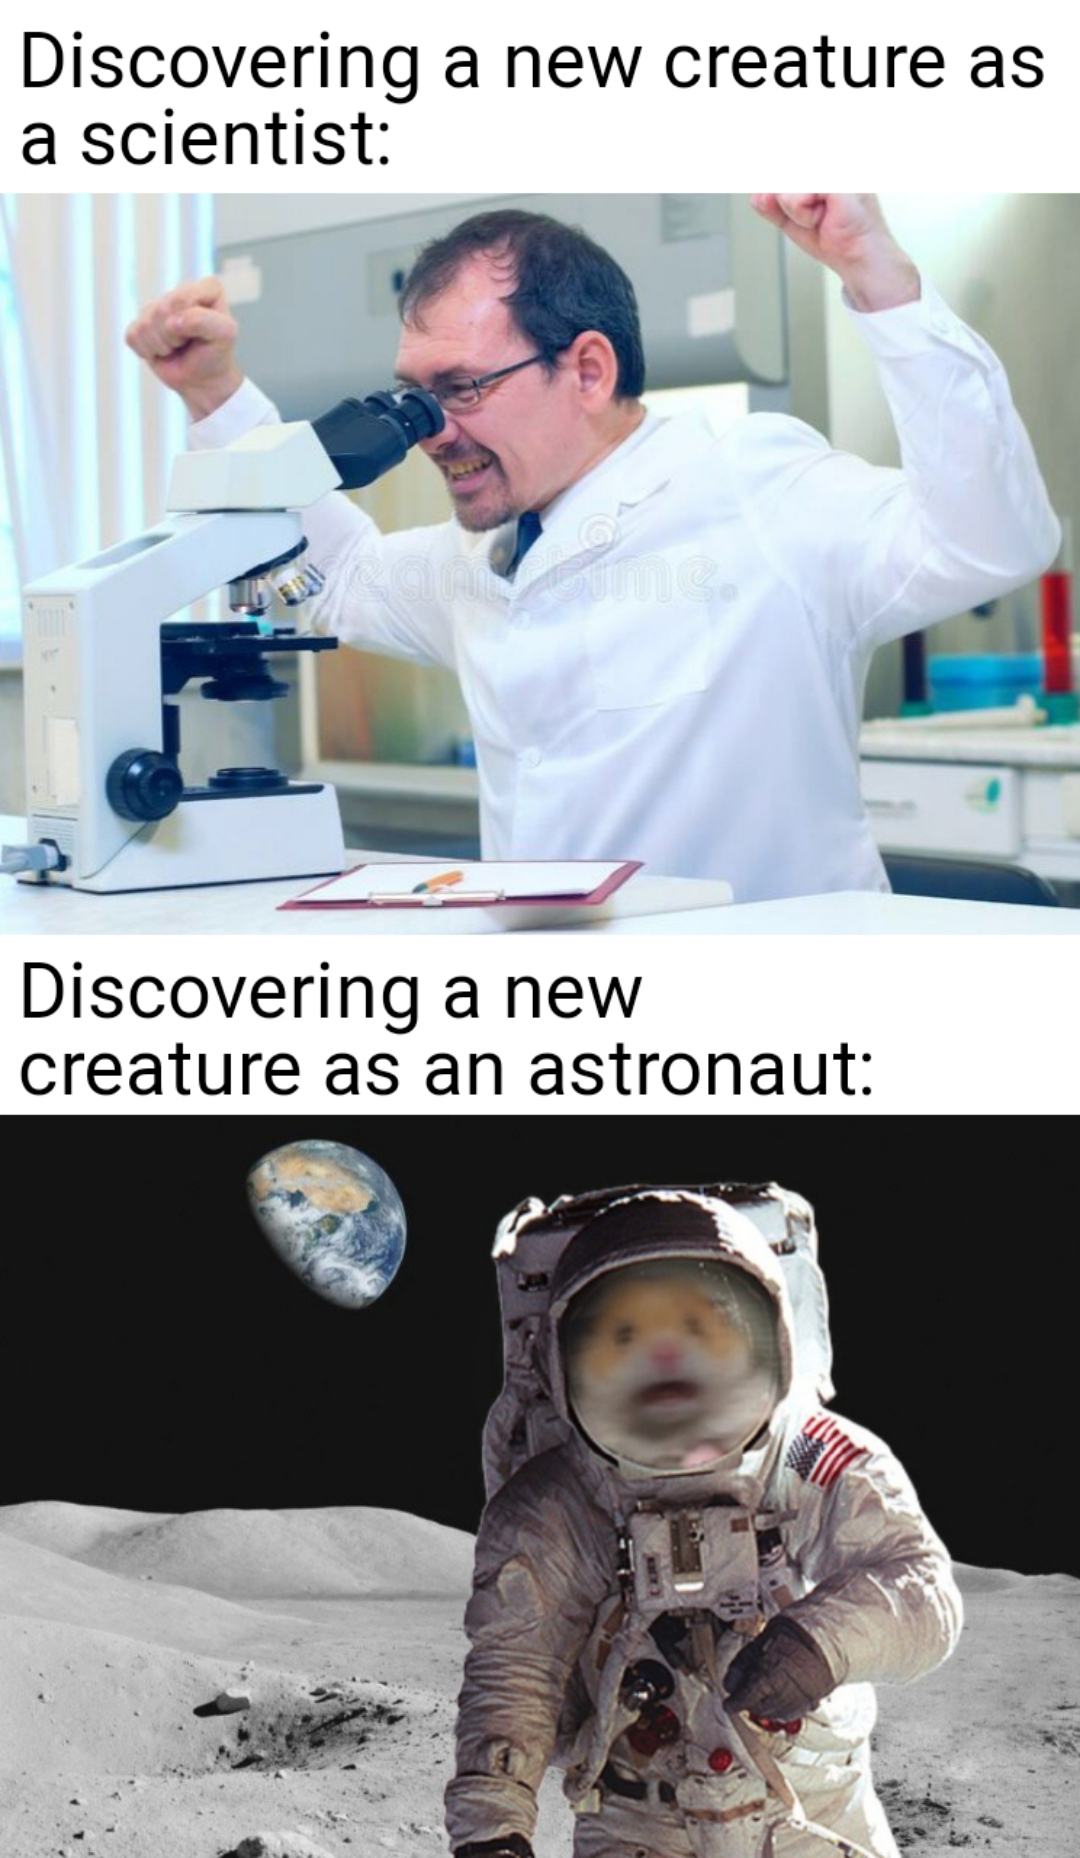 photo caption - Discovering a new creature as a scientist Discovering a new creature as an astronaut